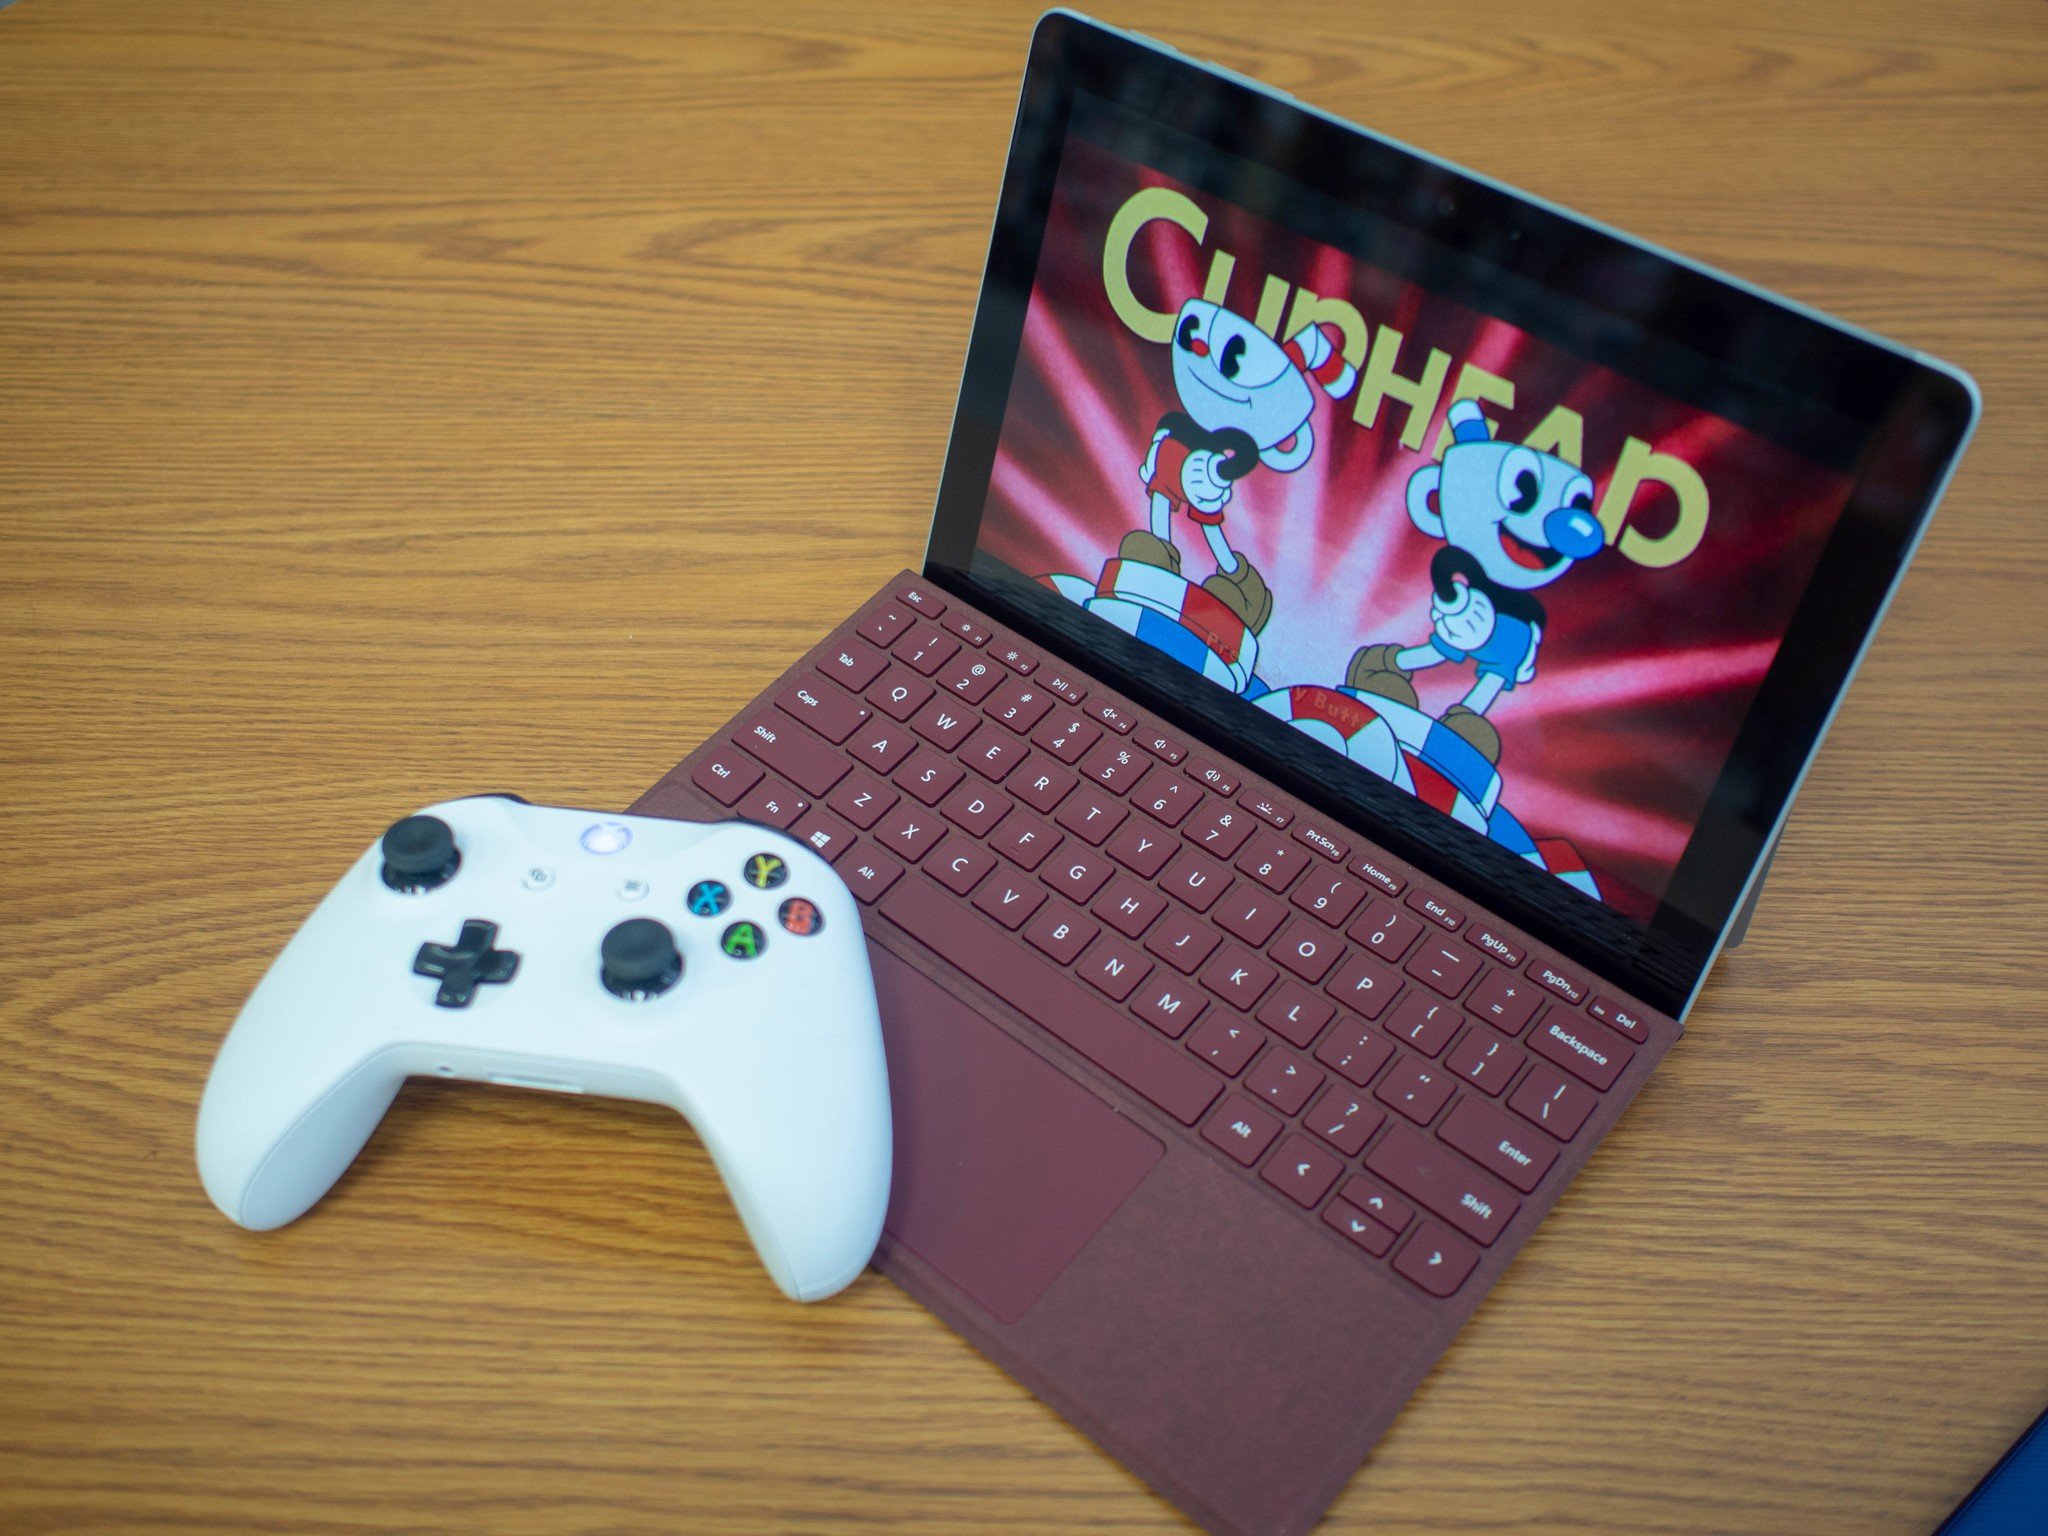 5 reasons why Surface Go is a good tablet for kids